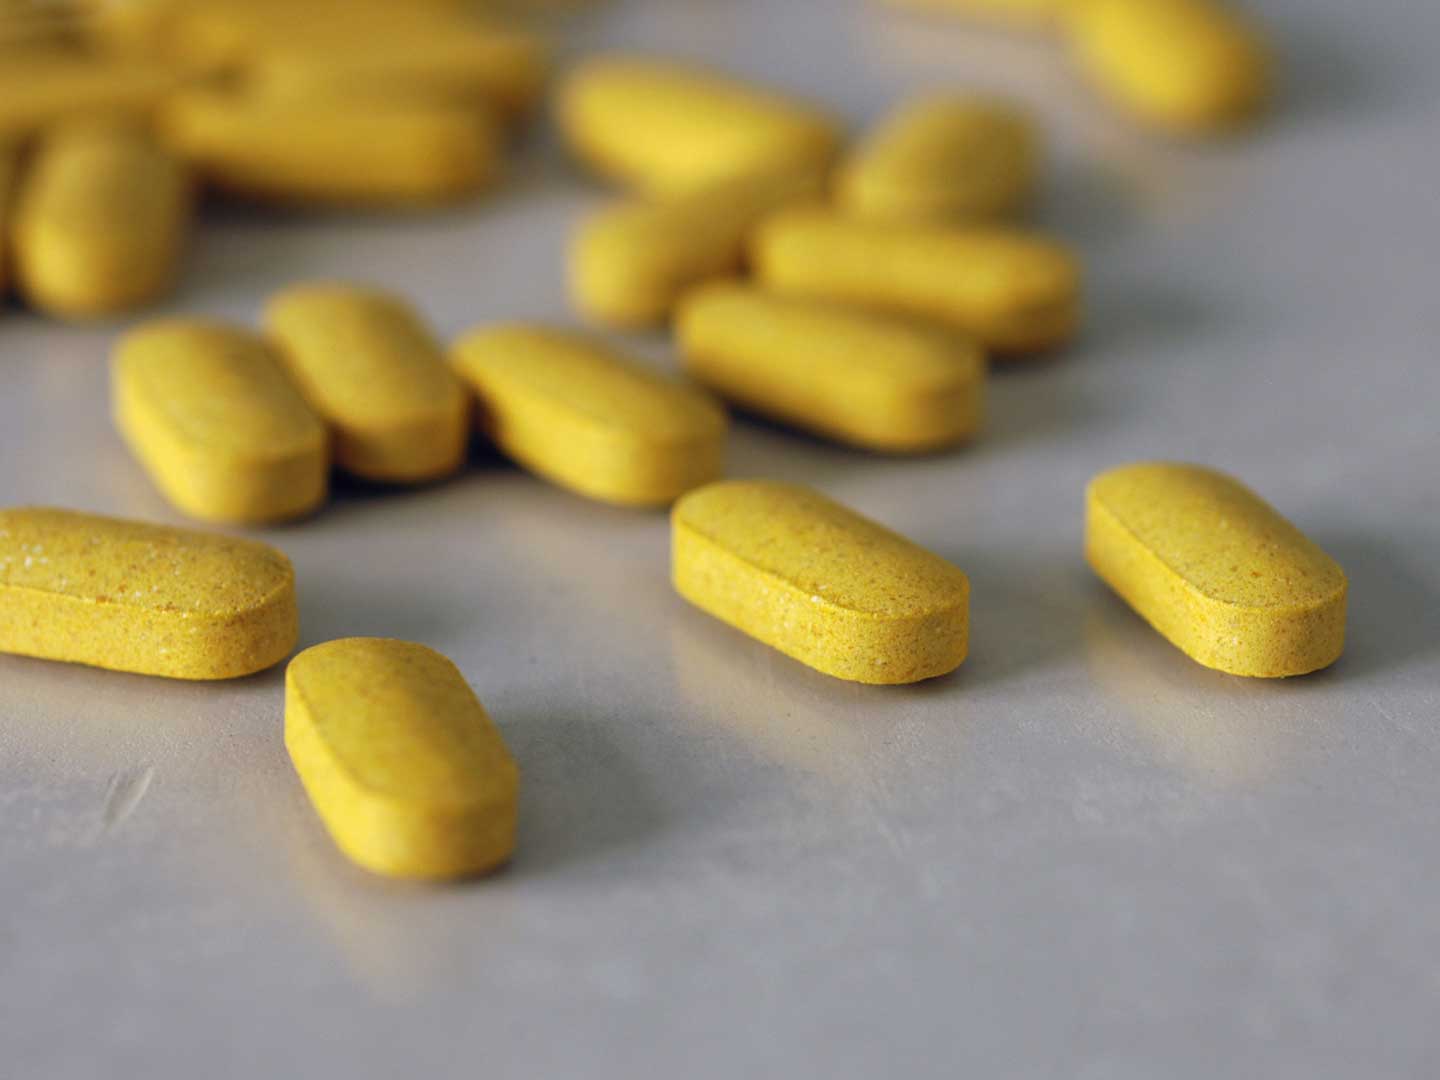 High-dose B-vitamins may be useful for reducing residual symptoms in people with schizophrenia